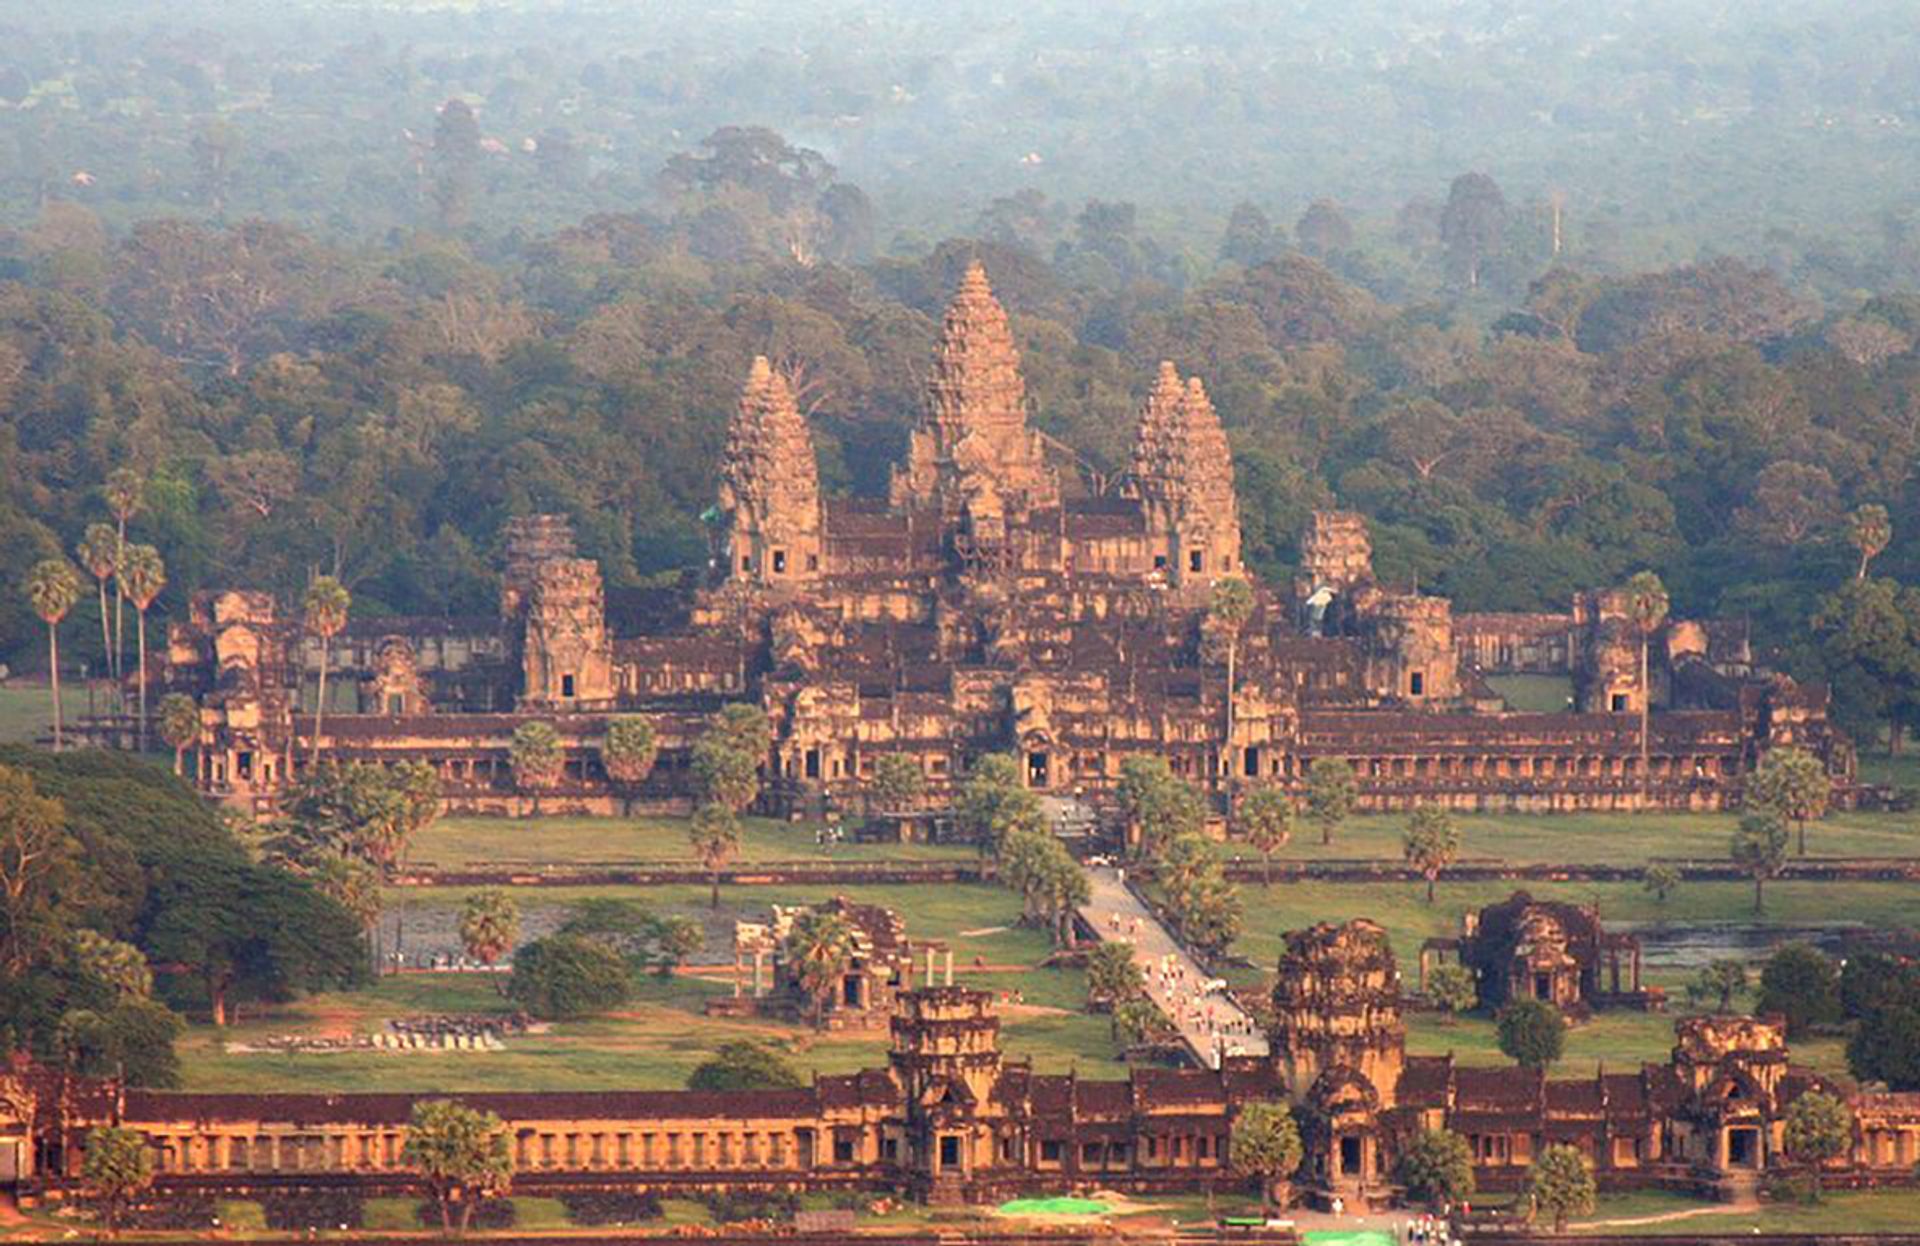 The Angkor Wat temple complex in northern Cambodia © Flickr